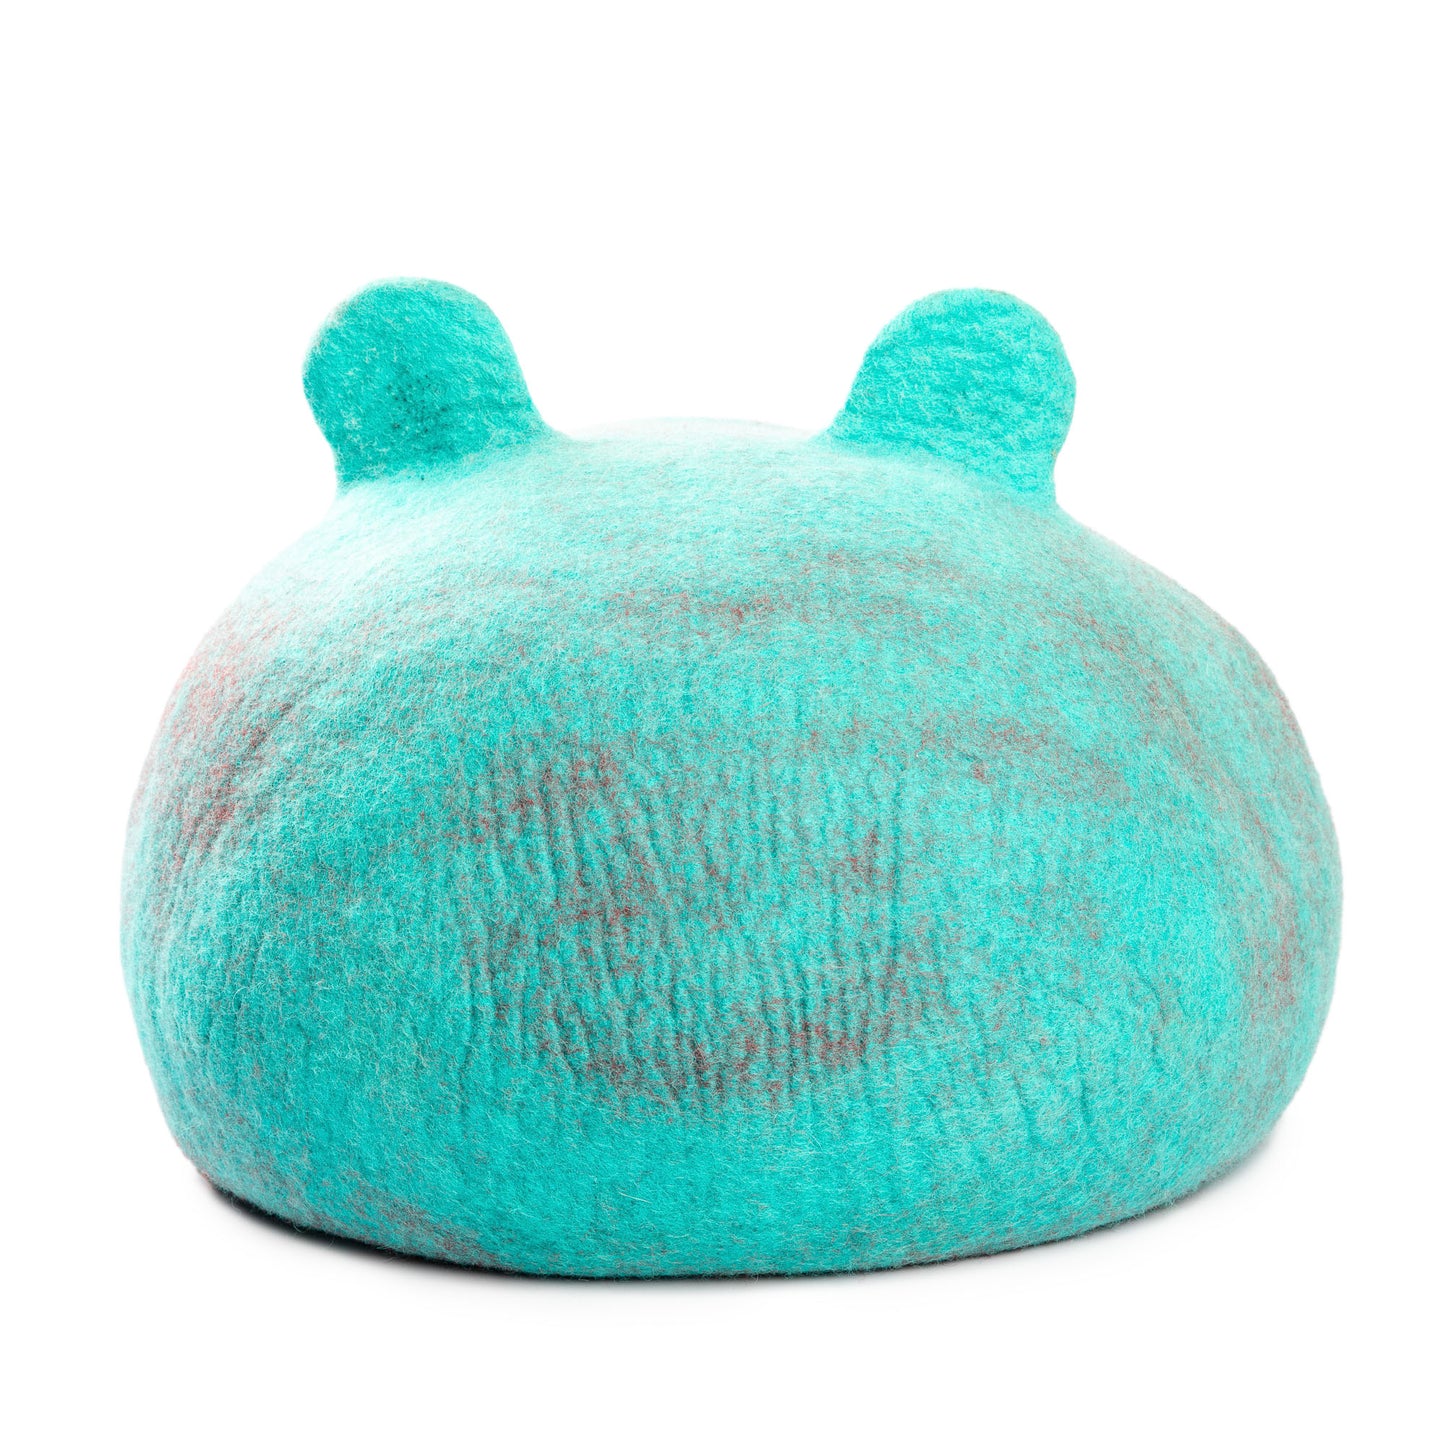 Frog-Design Cozy Cat Cave: Stylish Felt Wool Indoor Retreat for Small to Medium Cats, Pet Furniture for Ultimate Comfort